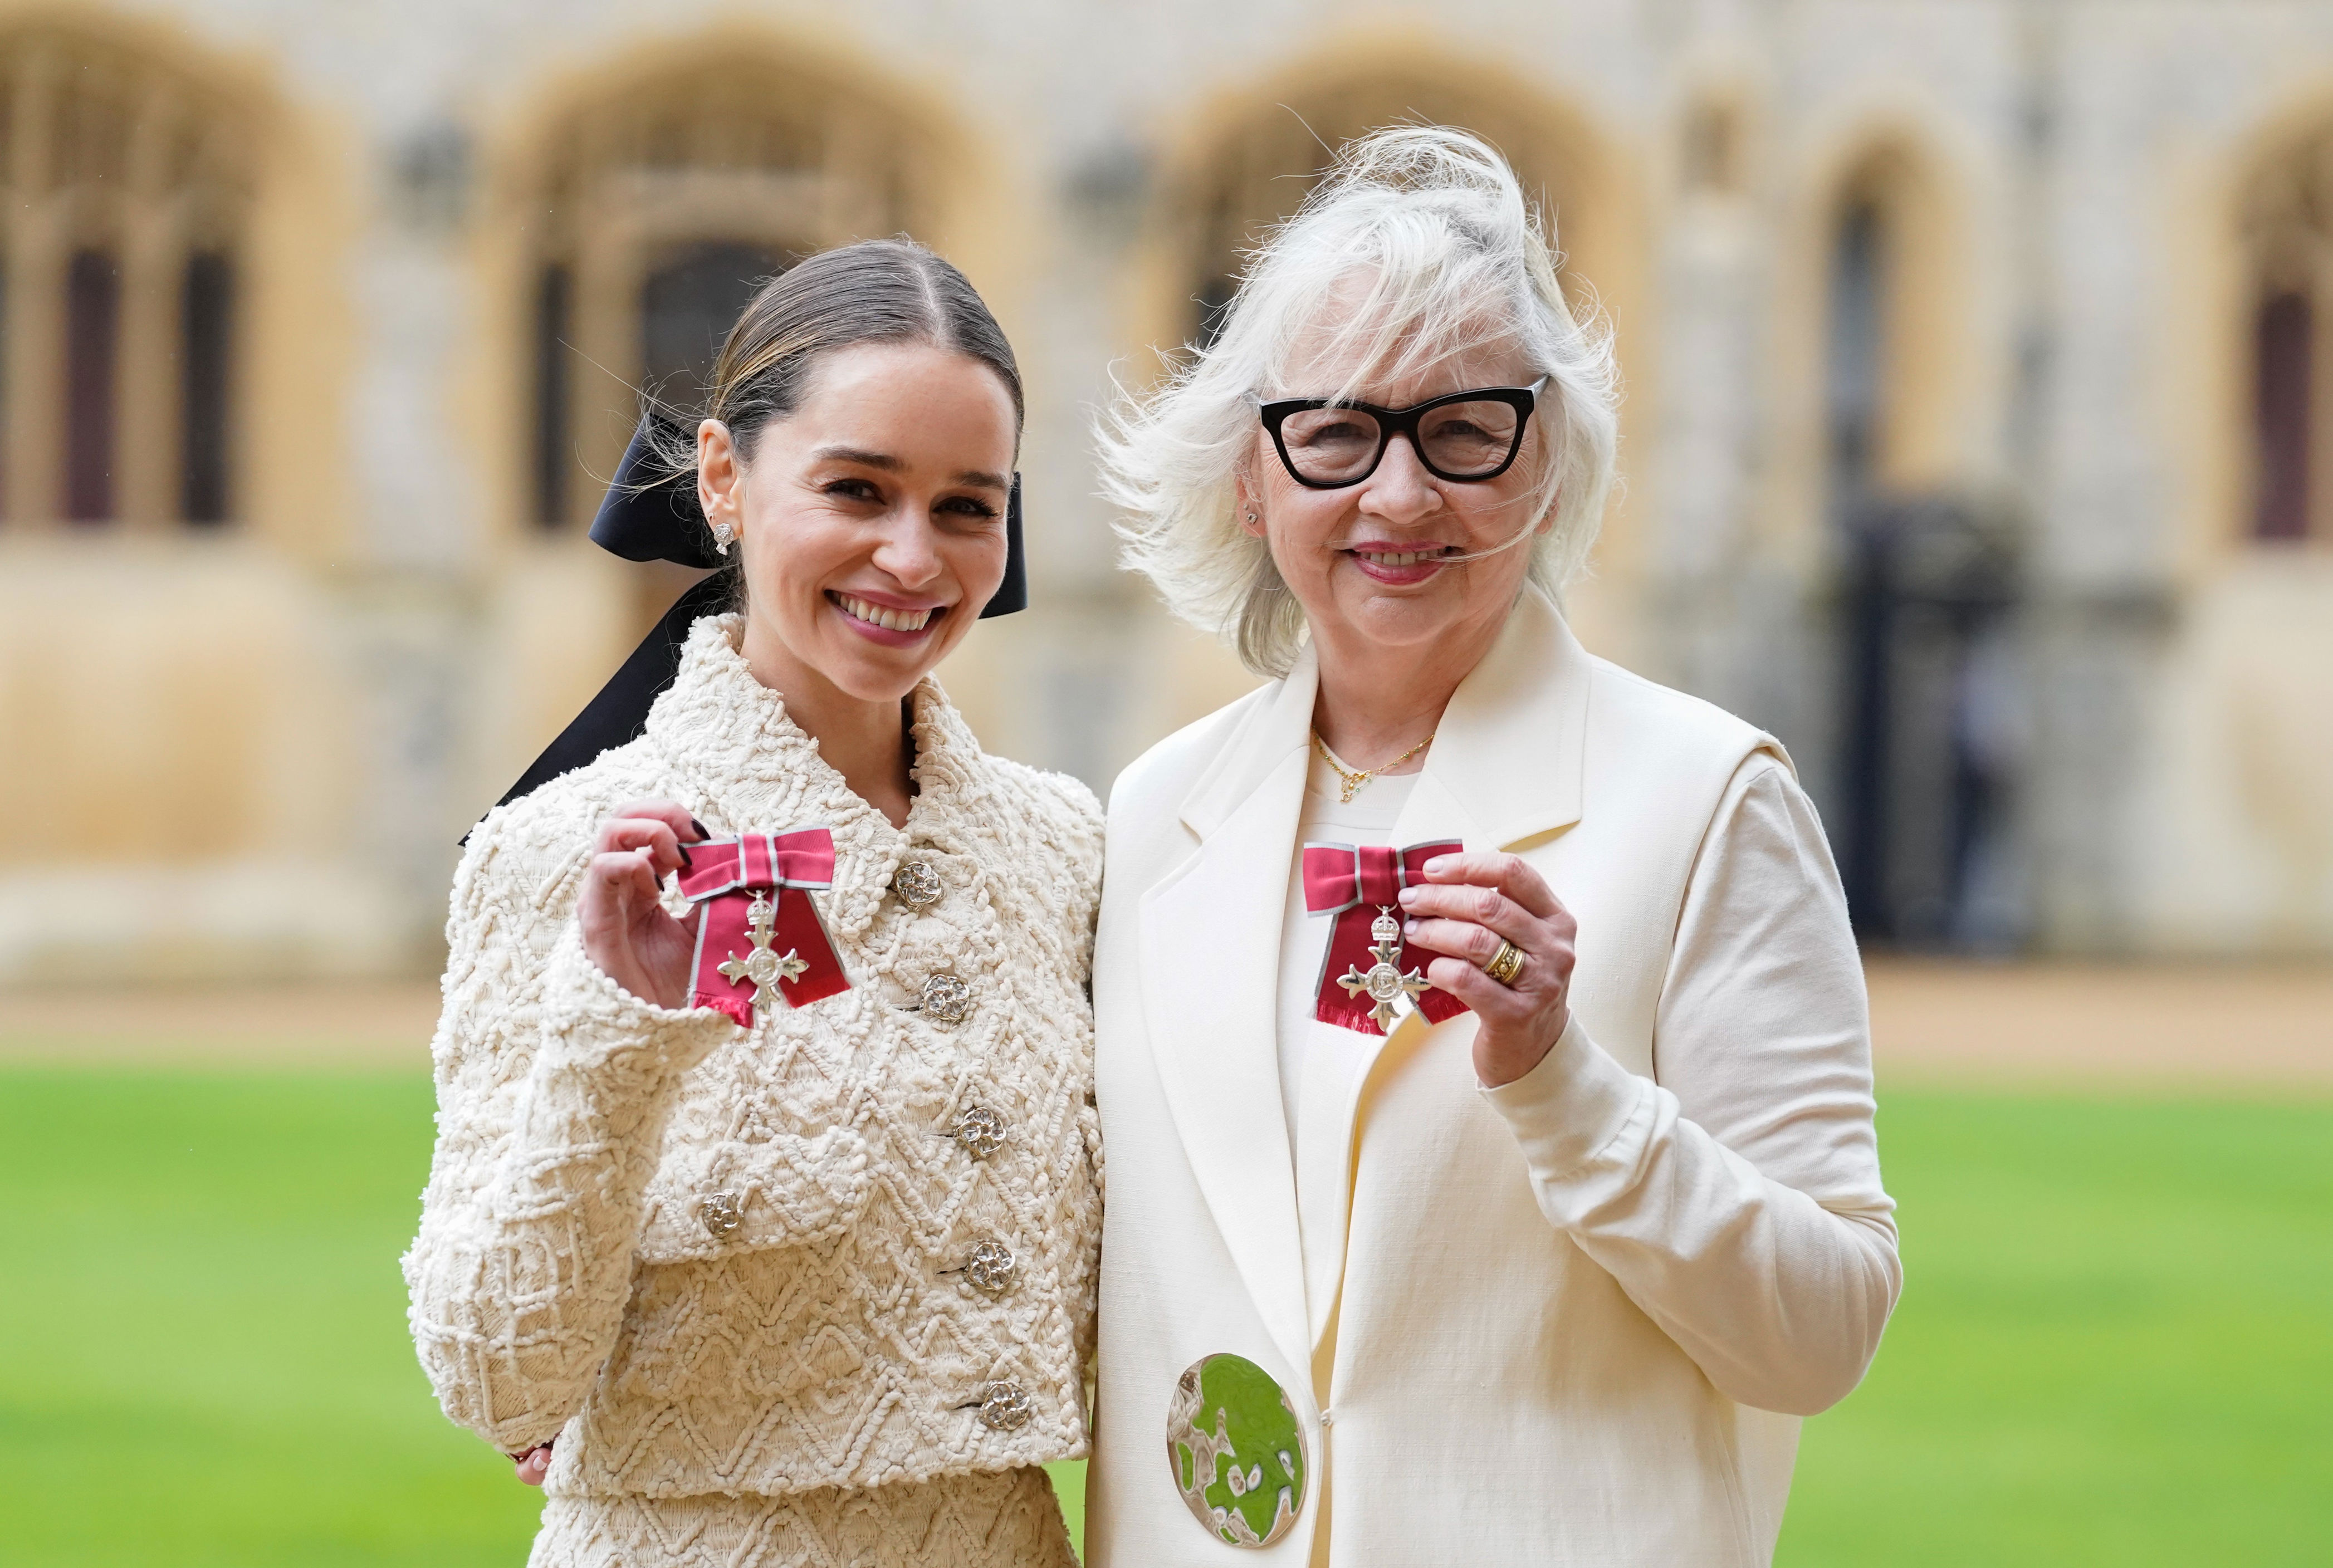 emilia clarke on almost dying from brain haemorrhage as she is awarded with mbe